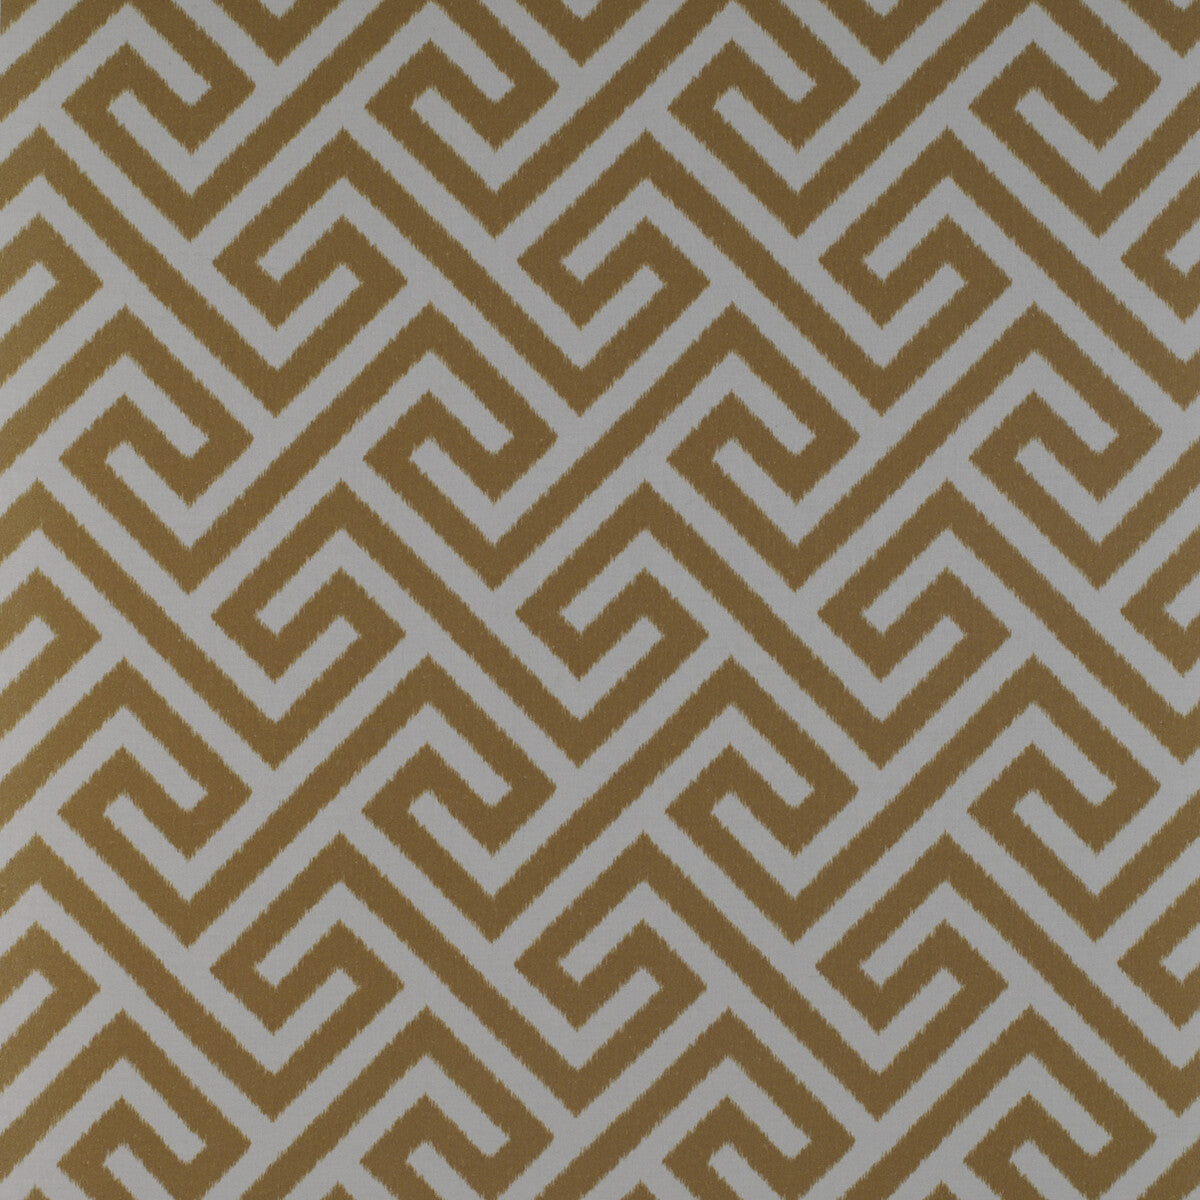 Trevi fabric in ocre color - pattern GDT5337.005.0 - by Gaston y Daniela in the Tierras collection